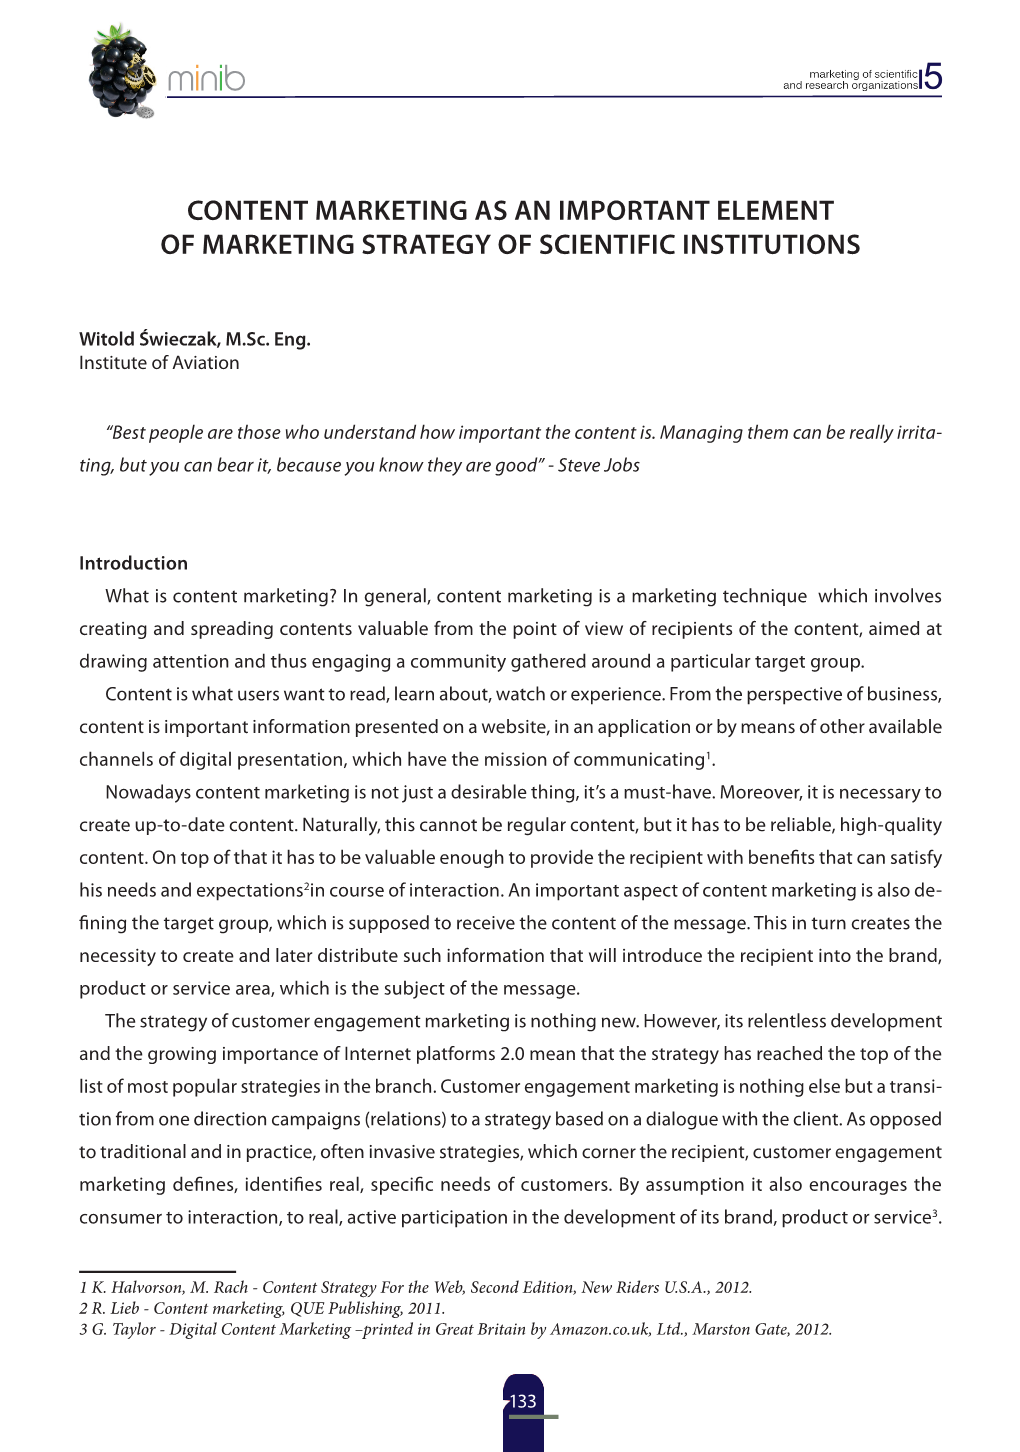 Content Marketing As an Important Element of Marketing Strategy of Scientific Institutions